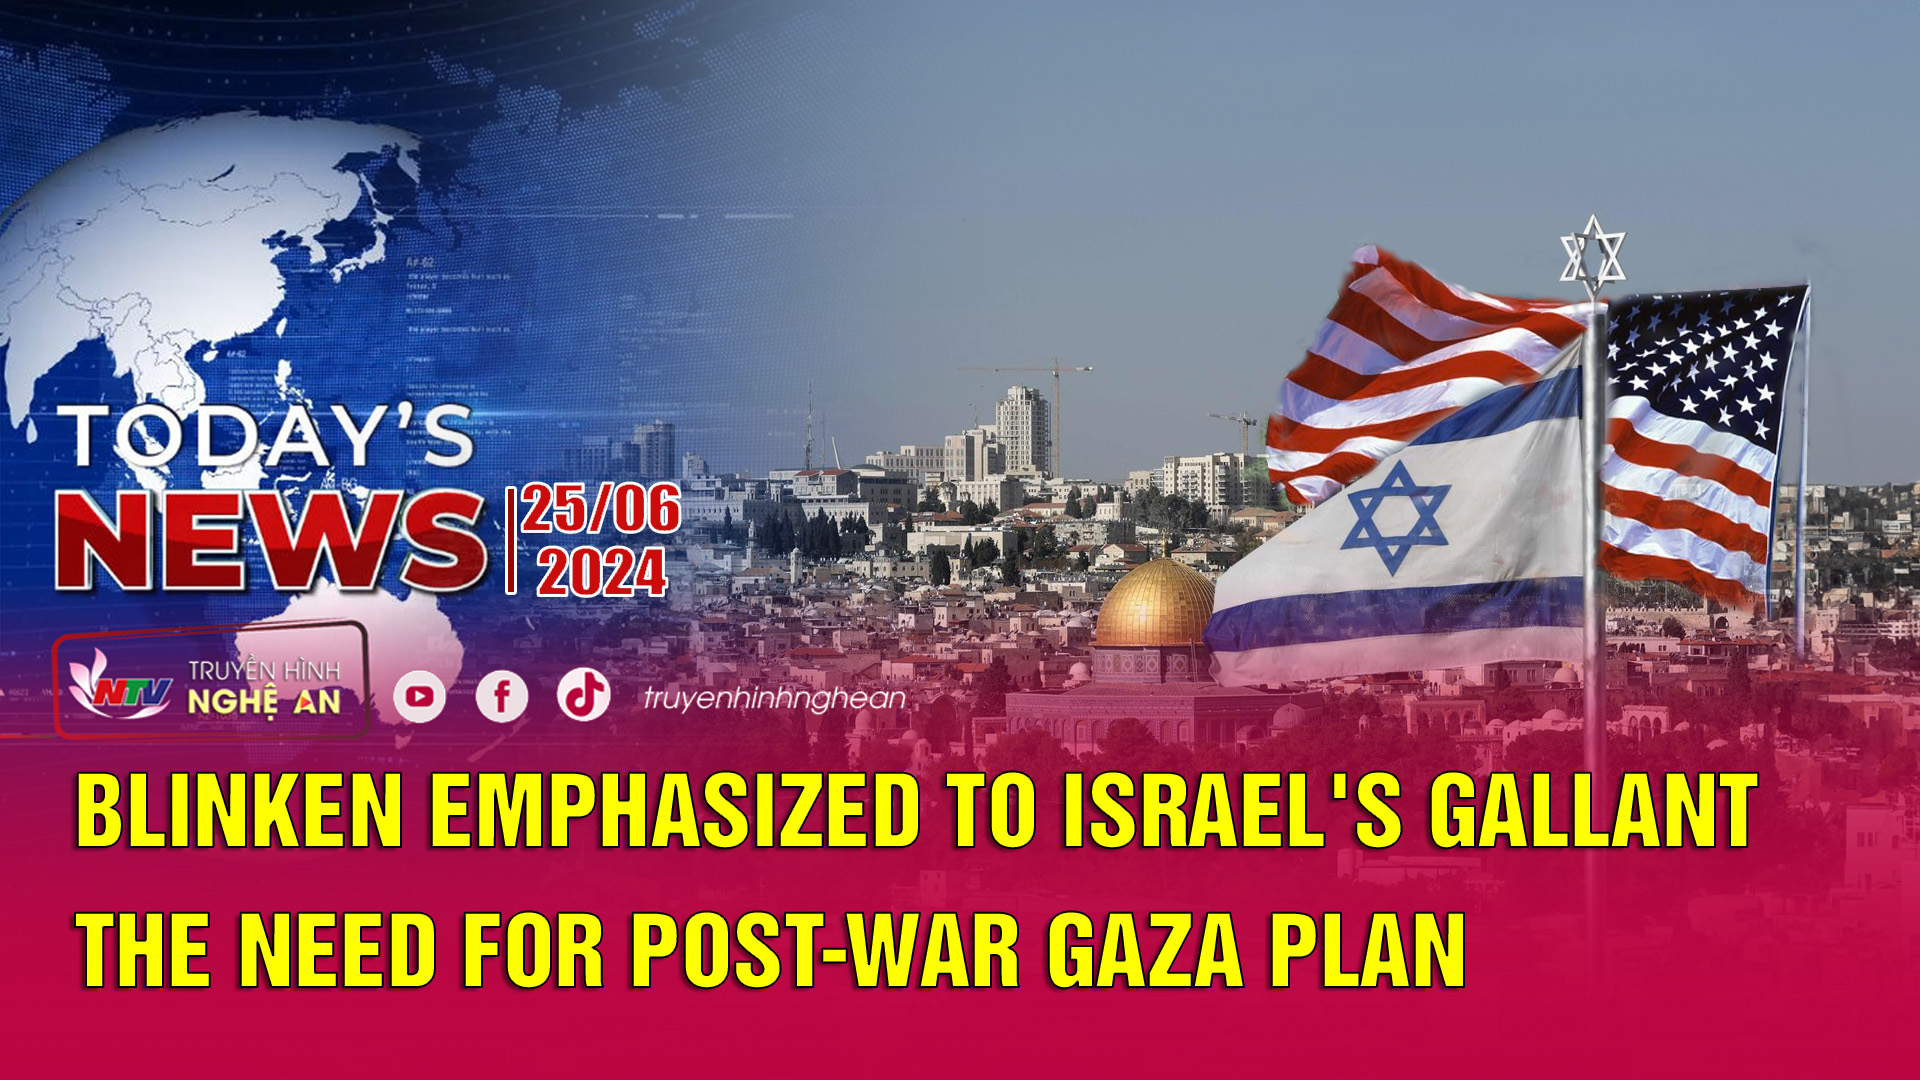 Today's News 25/06/2024: Blinken emphasized to Israel's Gallant the need for post-war Gaza plan